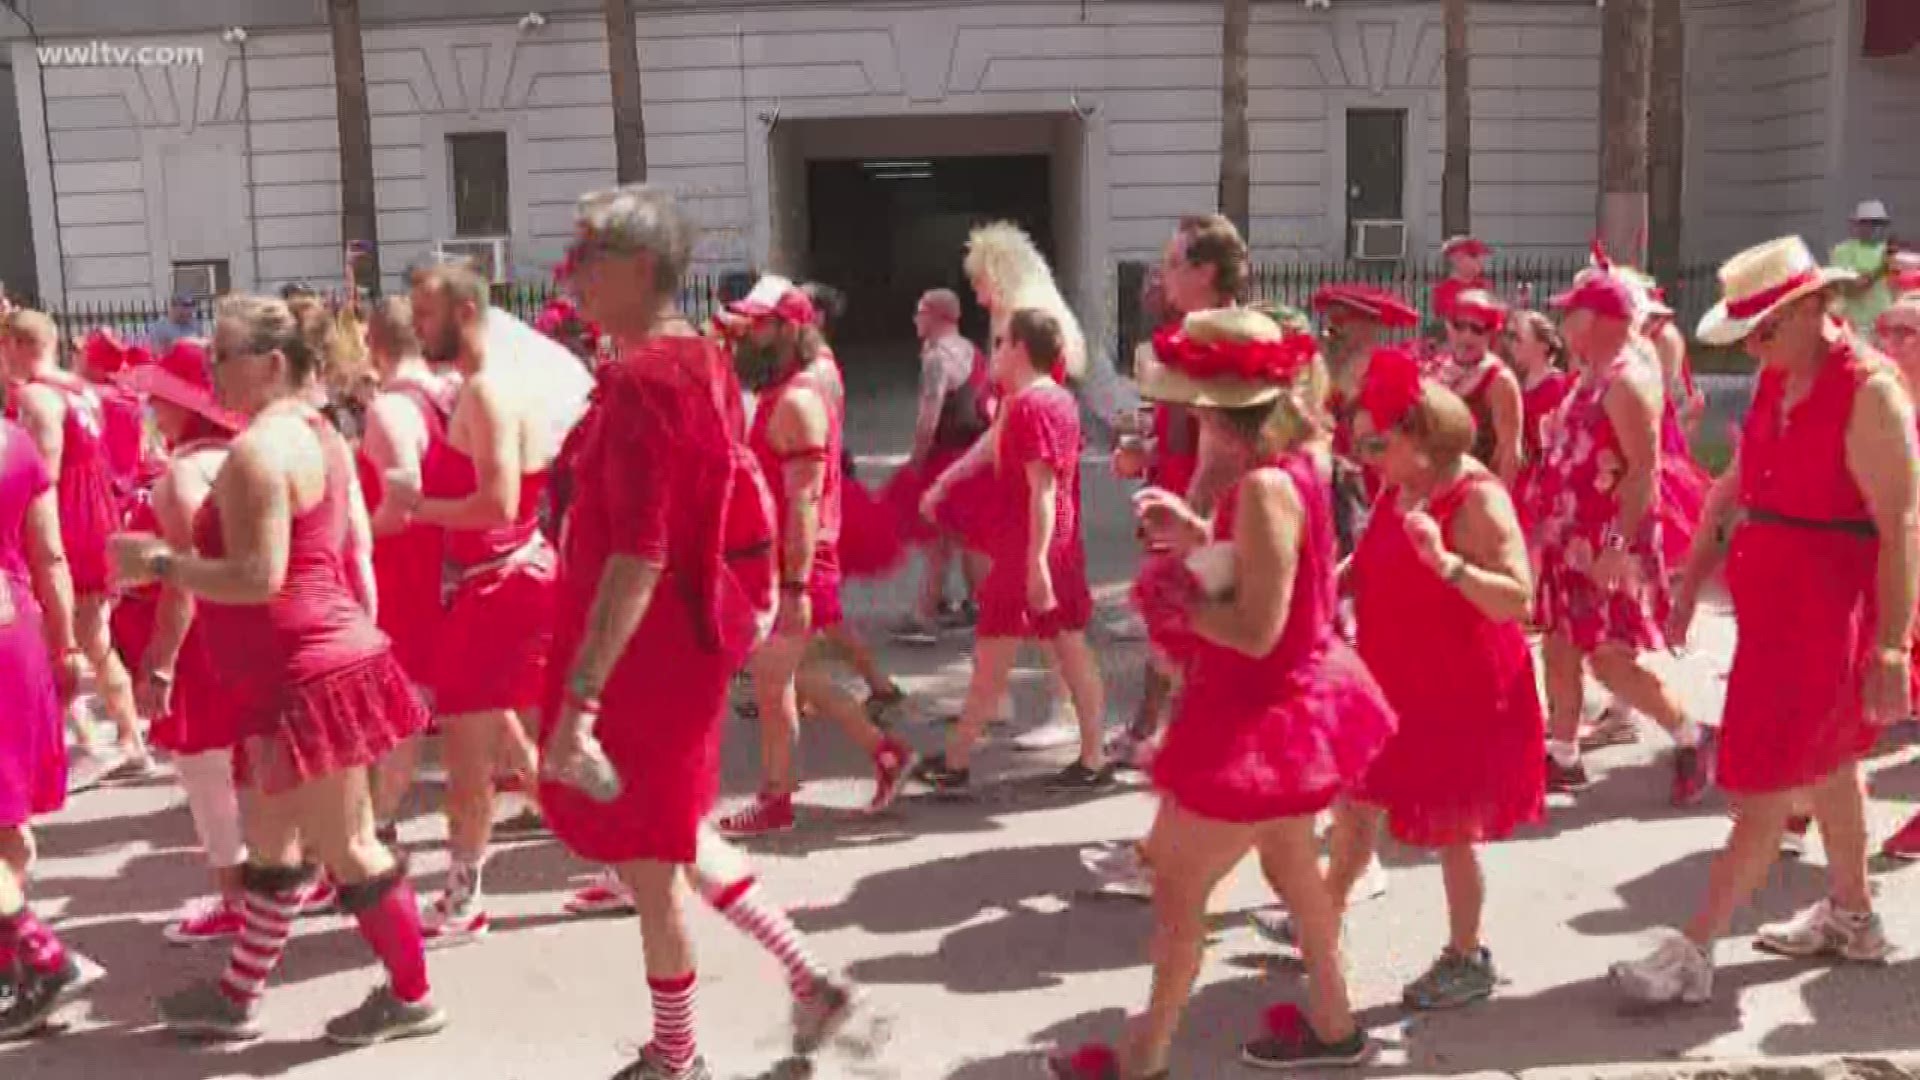 We would say it's the one time of the year you see guys wearing dresses… but it is New Orleans. Saturday, though, they did it for fun and a good cause, with the 25th annual Red Dress Run raising money for local charities.